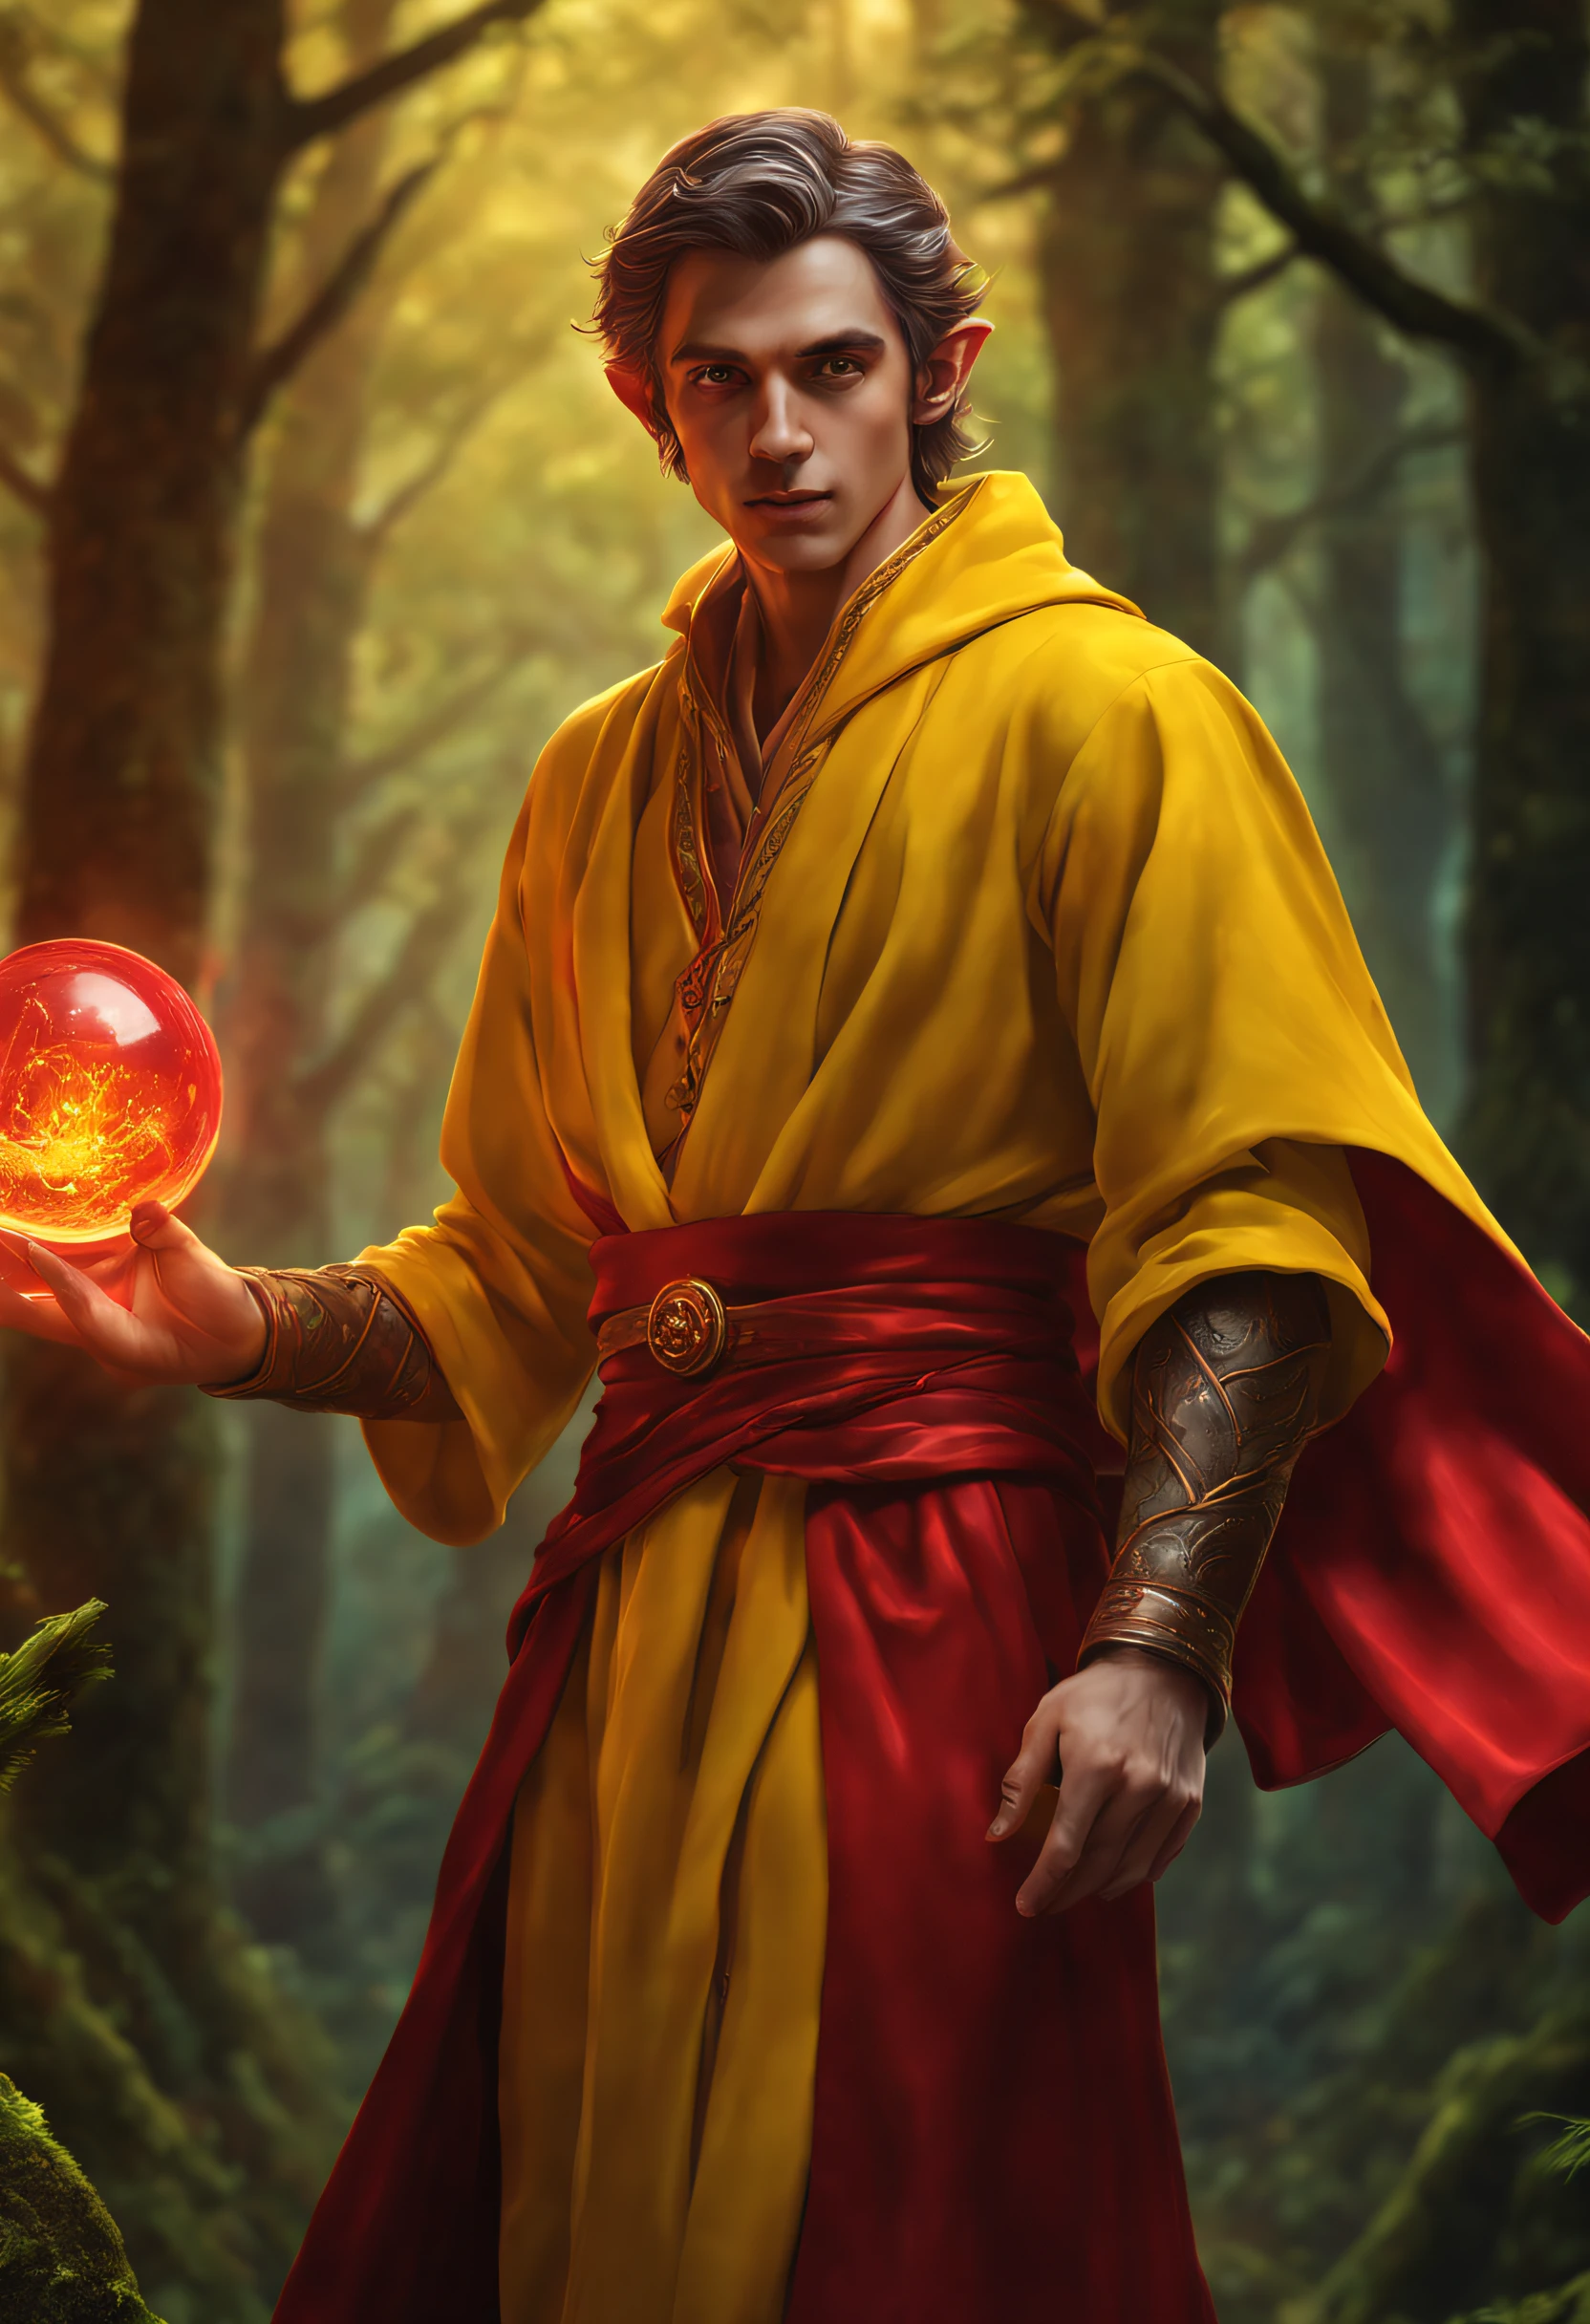 (Best quality,4K,8k,high resolucion,Masterpiece:1.2), Ultra-detailed, Realstic:1.37, Elf male in a yellow robe, Aura rouge puissante, Vibrant colors, Mystical Enlightenment, Tissu fluide, ancient forest paysage, Enchanted atmosphere, expression intrigante, Intricate details, Portrait fantastique, magical atmosphere